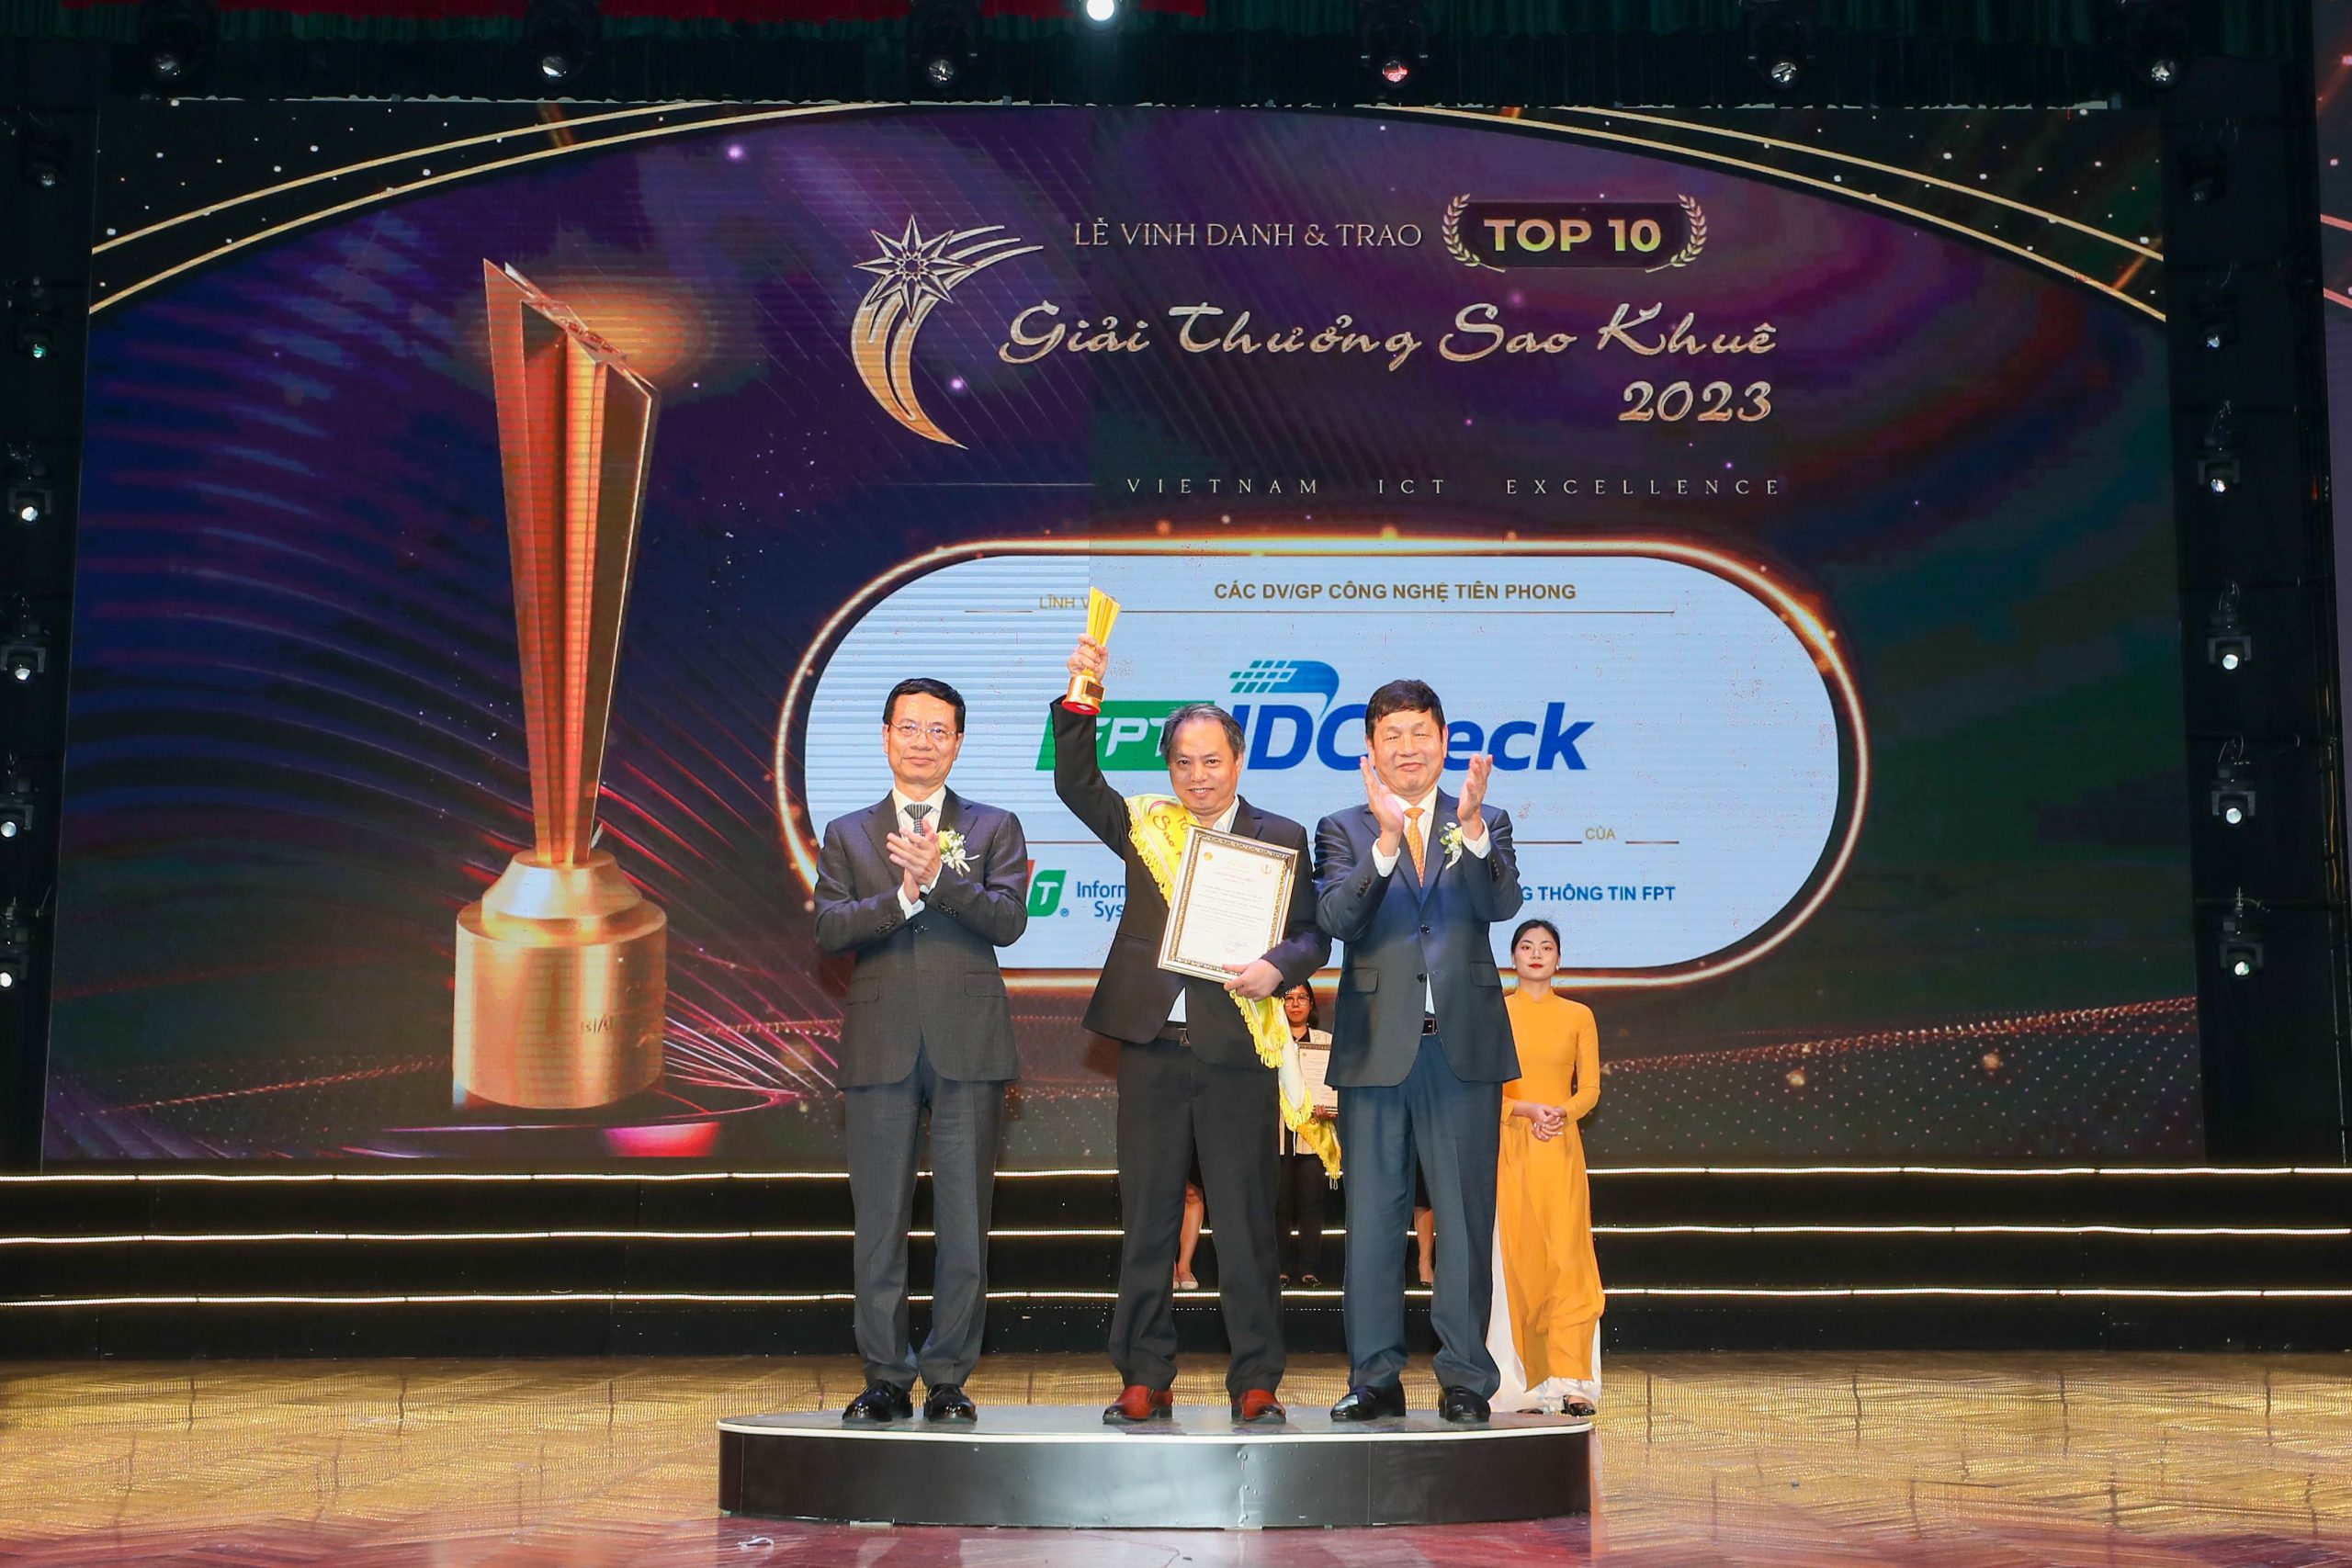 2023 Vietnam ICT Excellence Awards (Top 10 Vietnam ICT Excellence 2023) – Anti-fraud Solution for Digital Identity Verification (FPT.IDCheck)